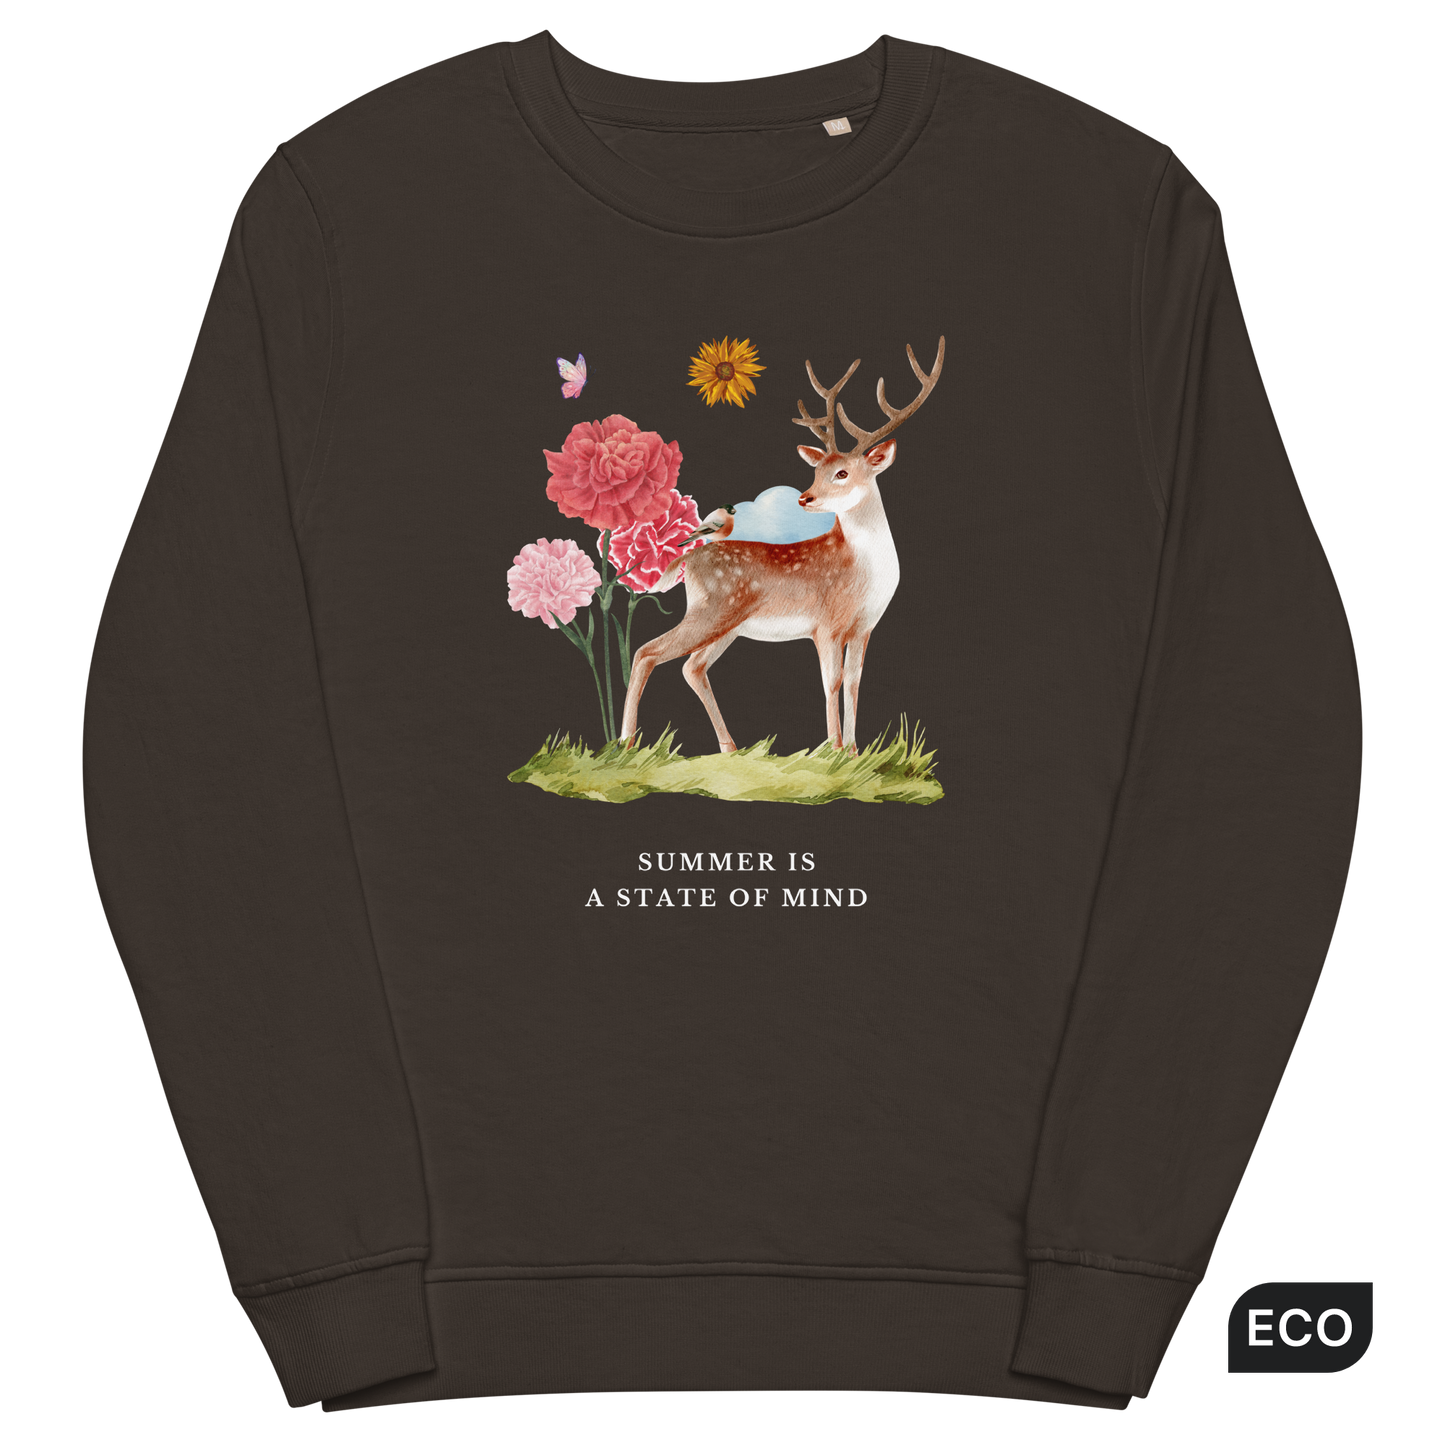 Deep Charcoal Grey Organic Cotton Summer Is a State of Mind Sweatshirt featuring a Summer Is a State of Mind graphic on the chest - Cute Graphic Summer Sweatshirts - Boozy Fox